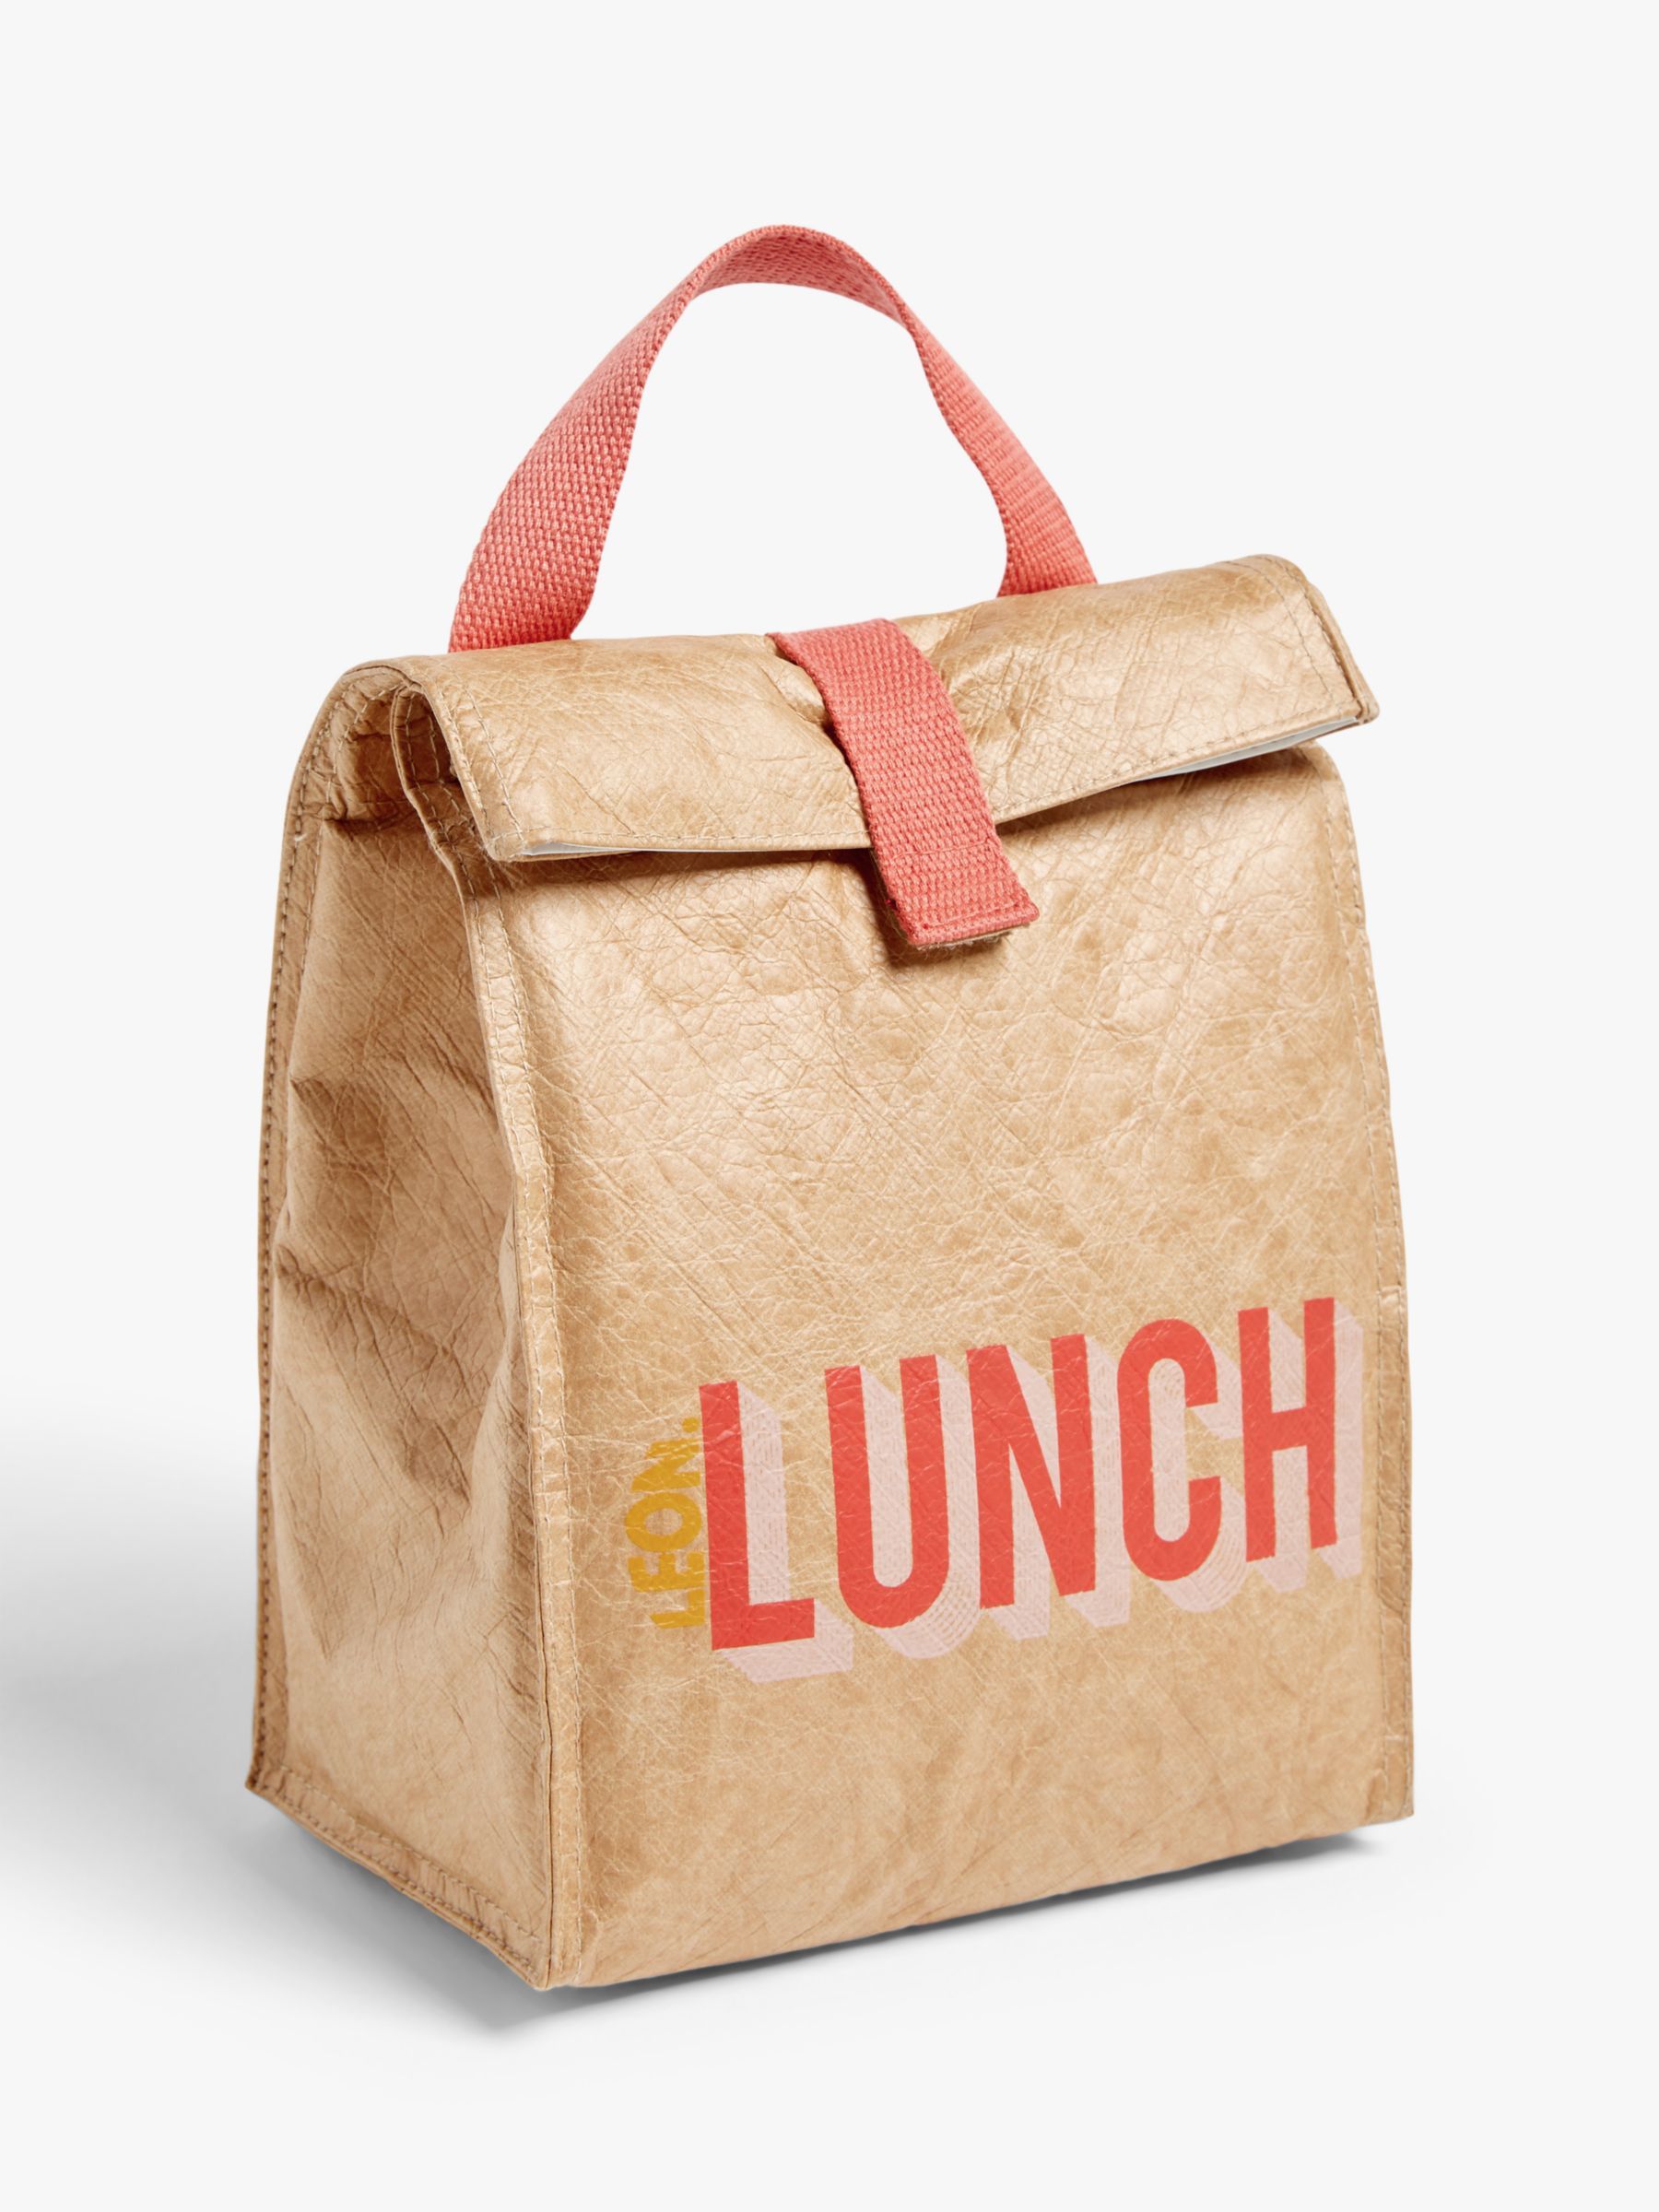 the best insulated lunch box